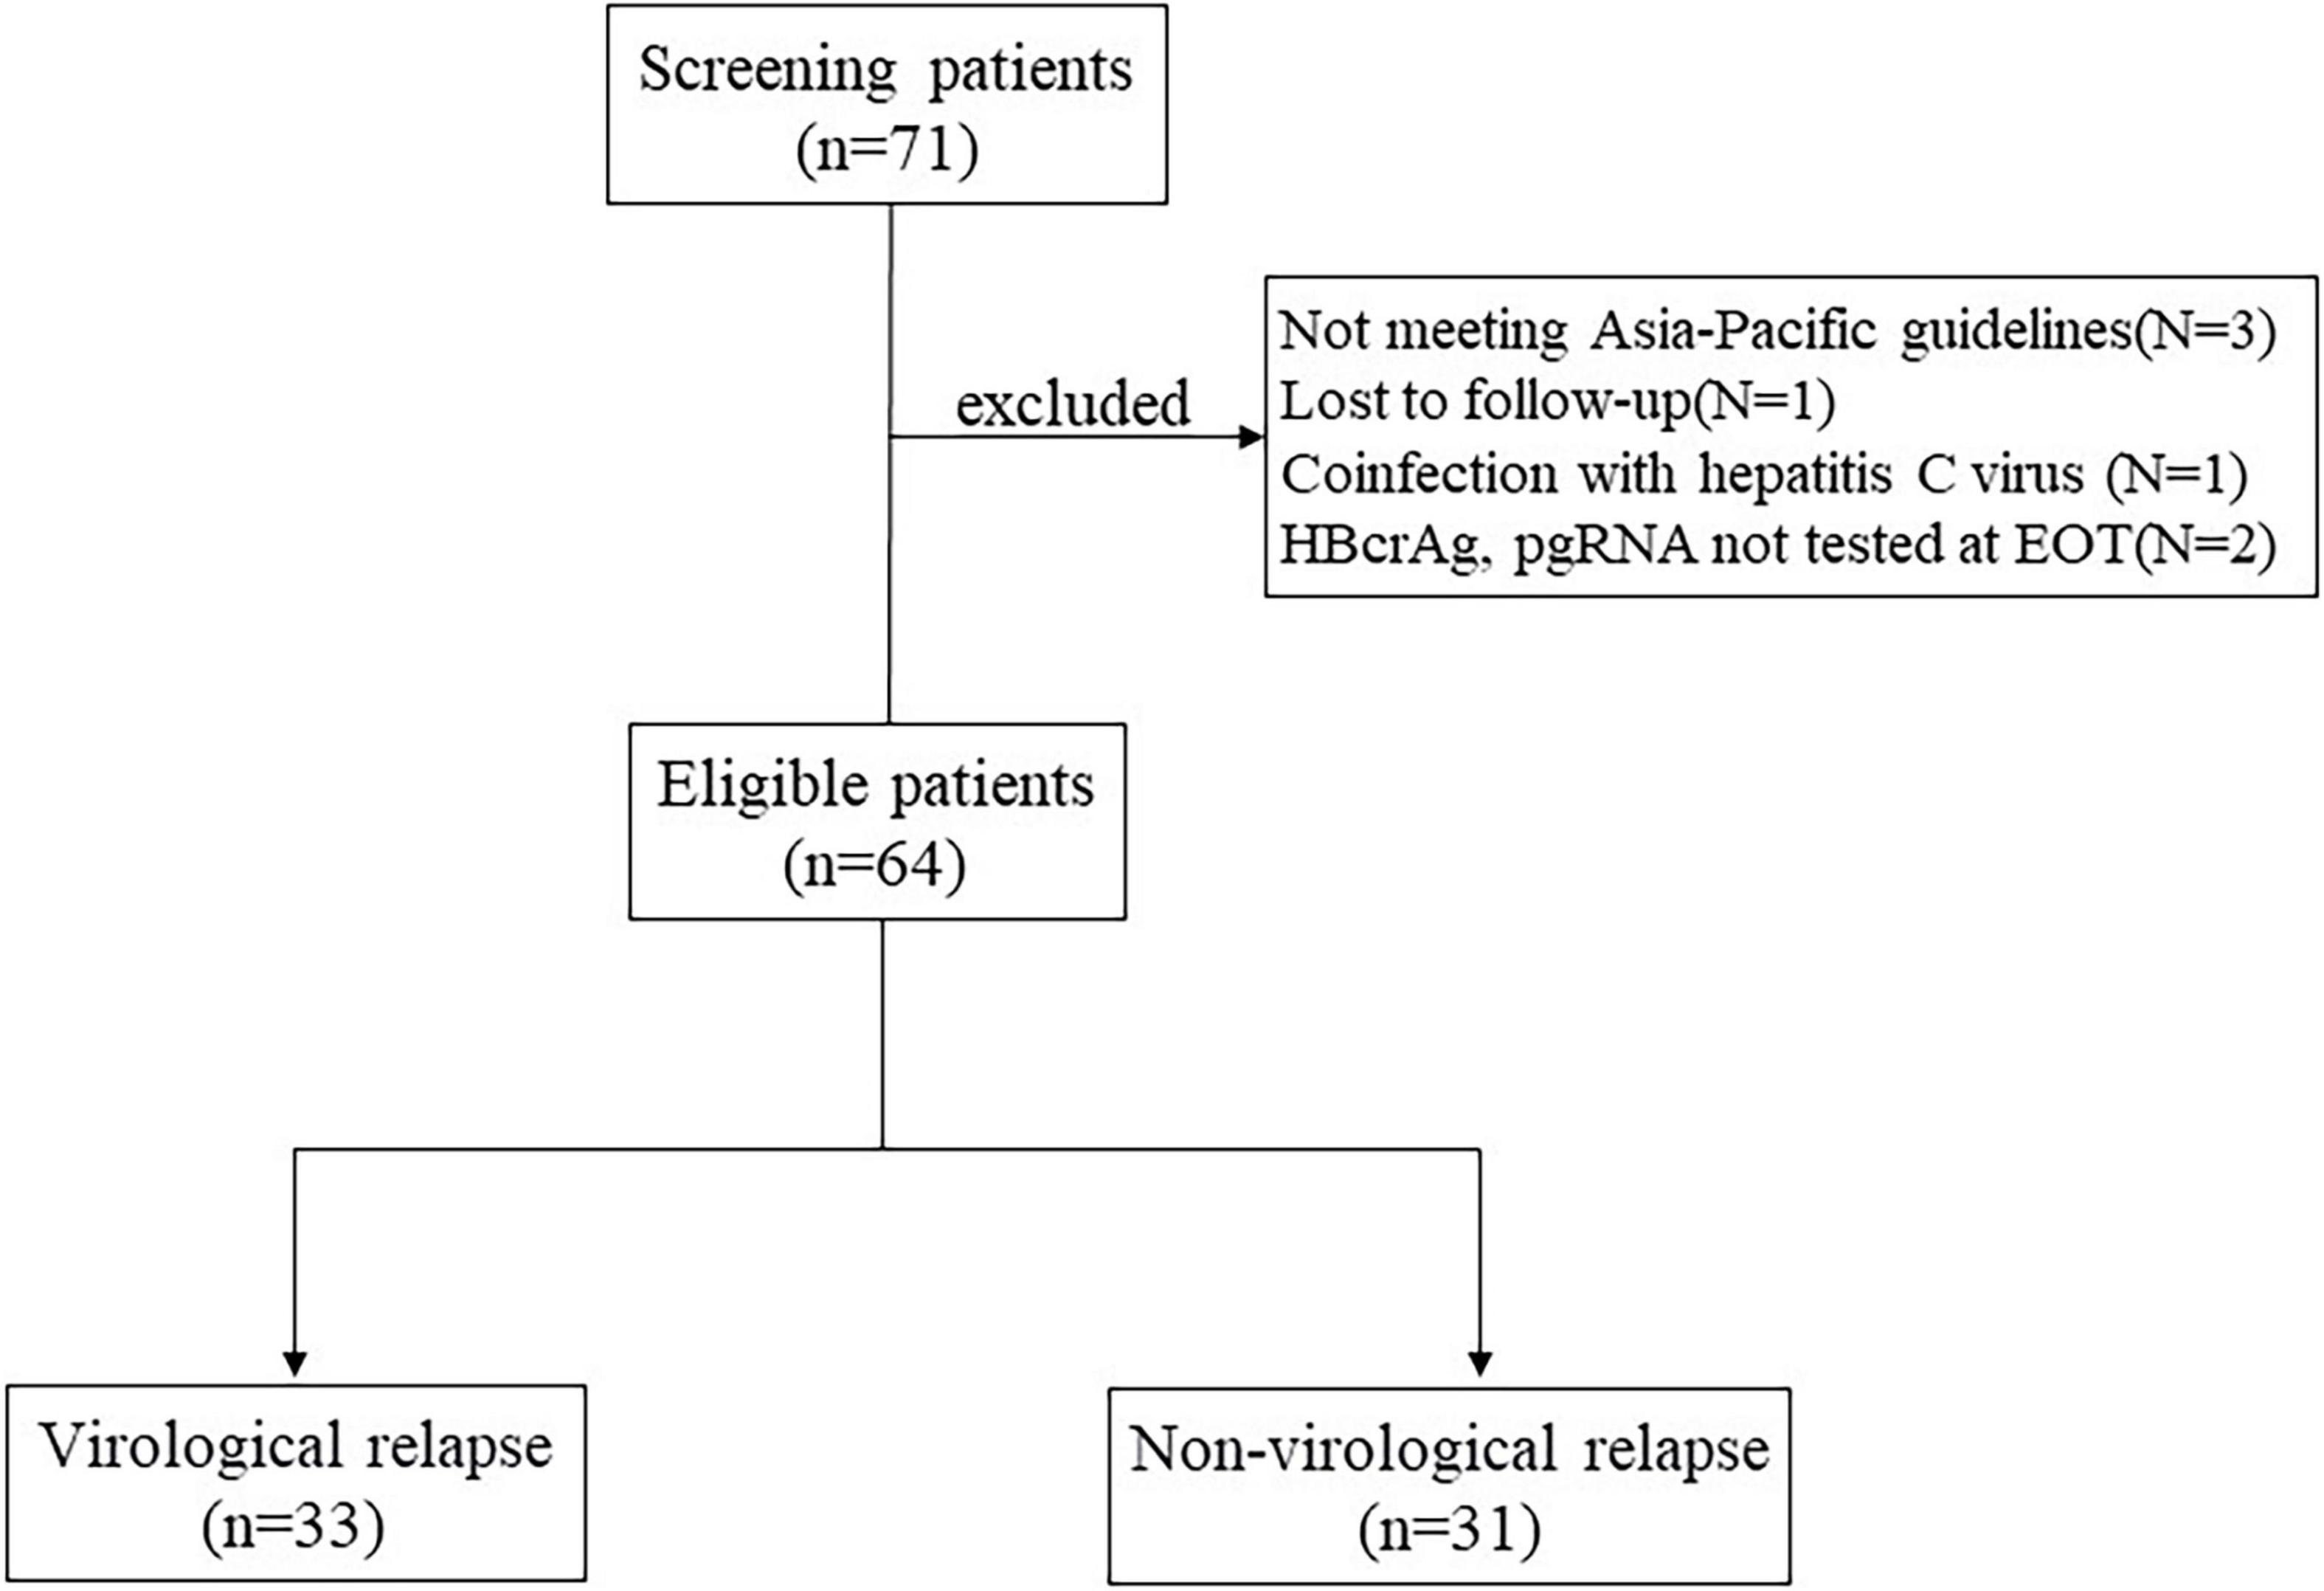 Frontiers  Serum Pregenomic RNA Combined With Hepatitis B Core-Related  Antigen Helps Predict the Risk of Virological Relapse After Discontinuation  of Nucleos(t)ide Analogs in Patients With Chronic Hepatitis B